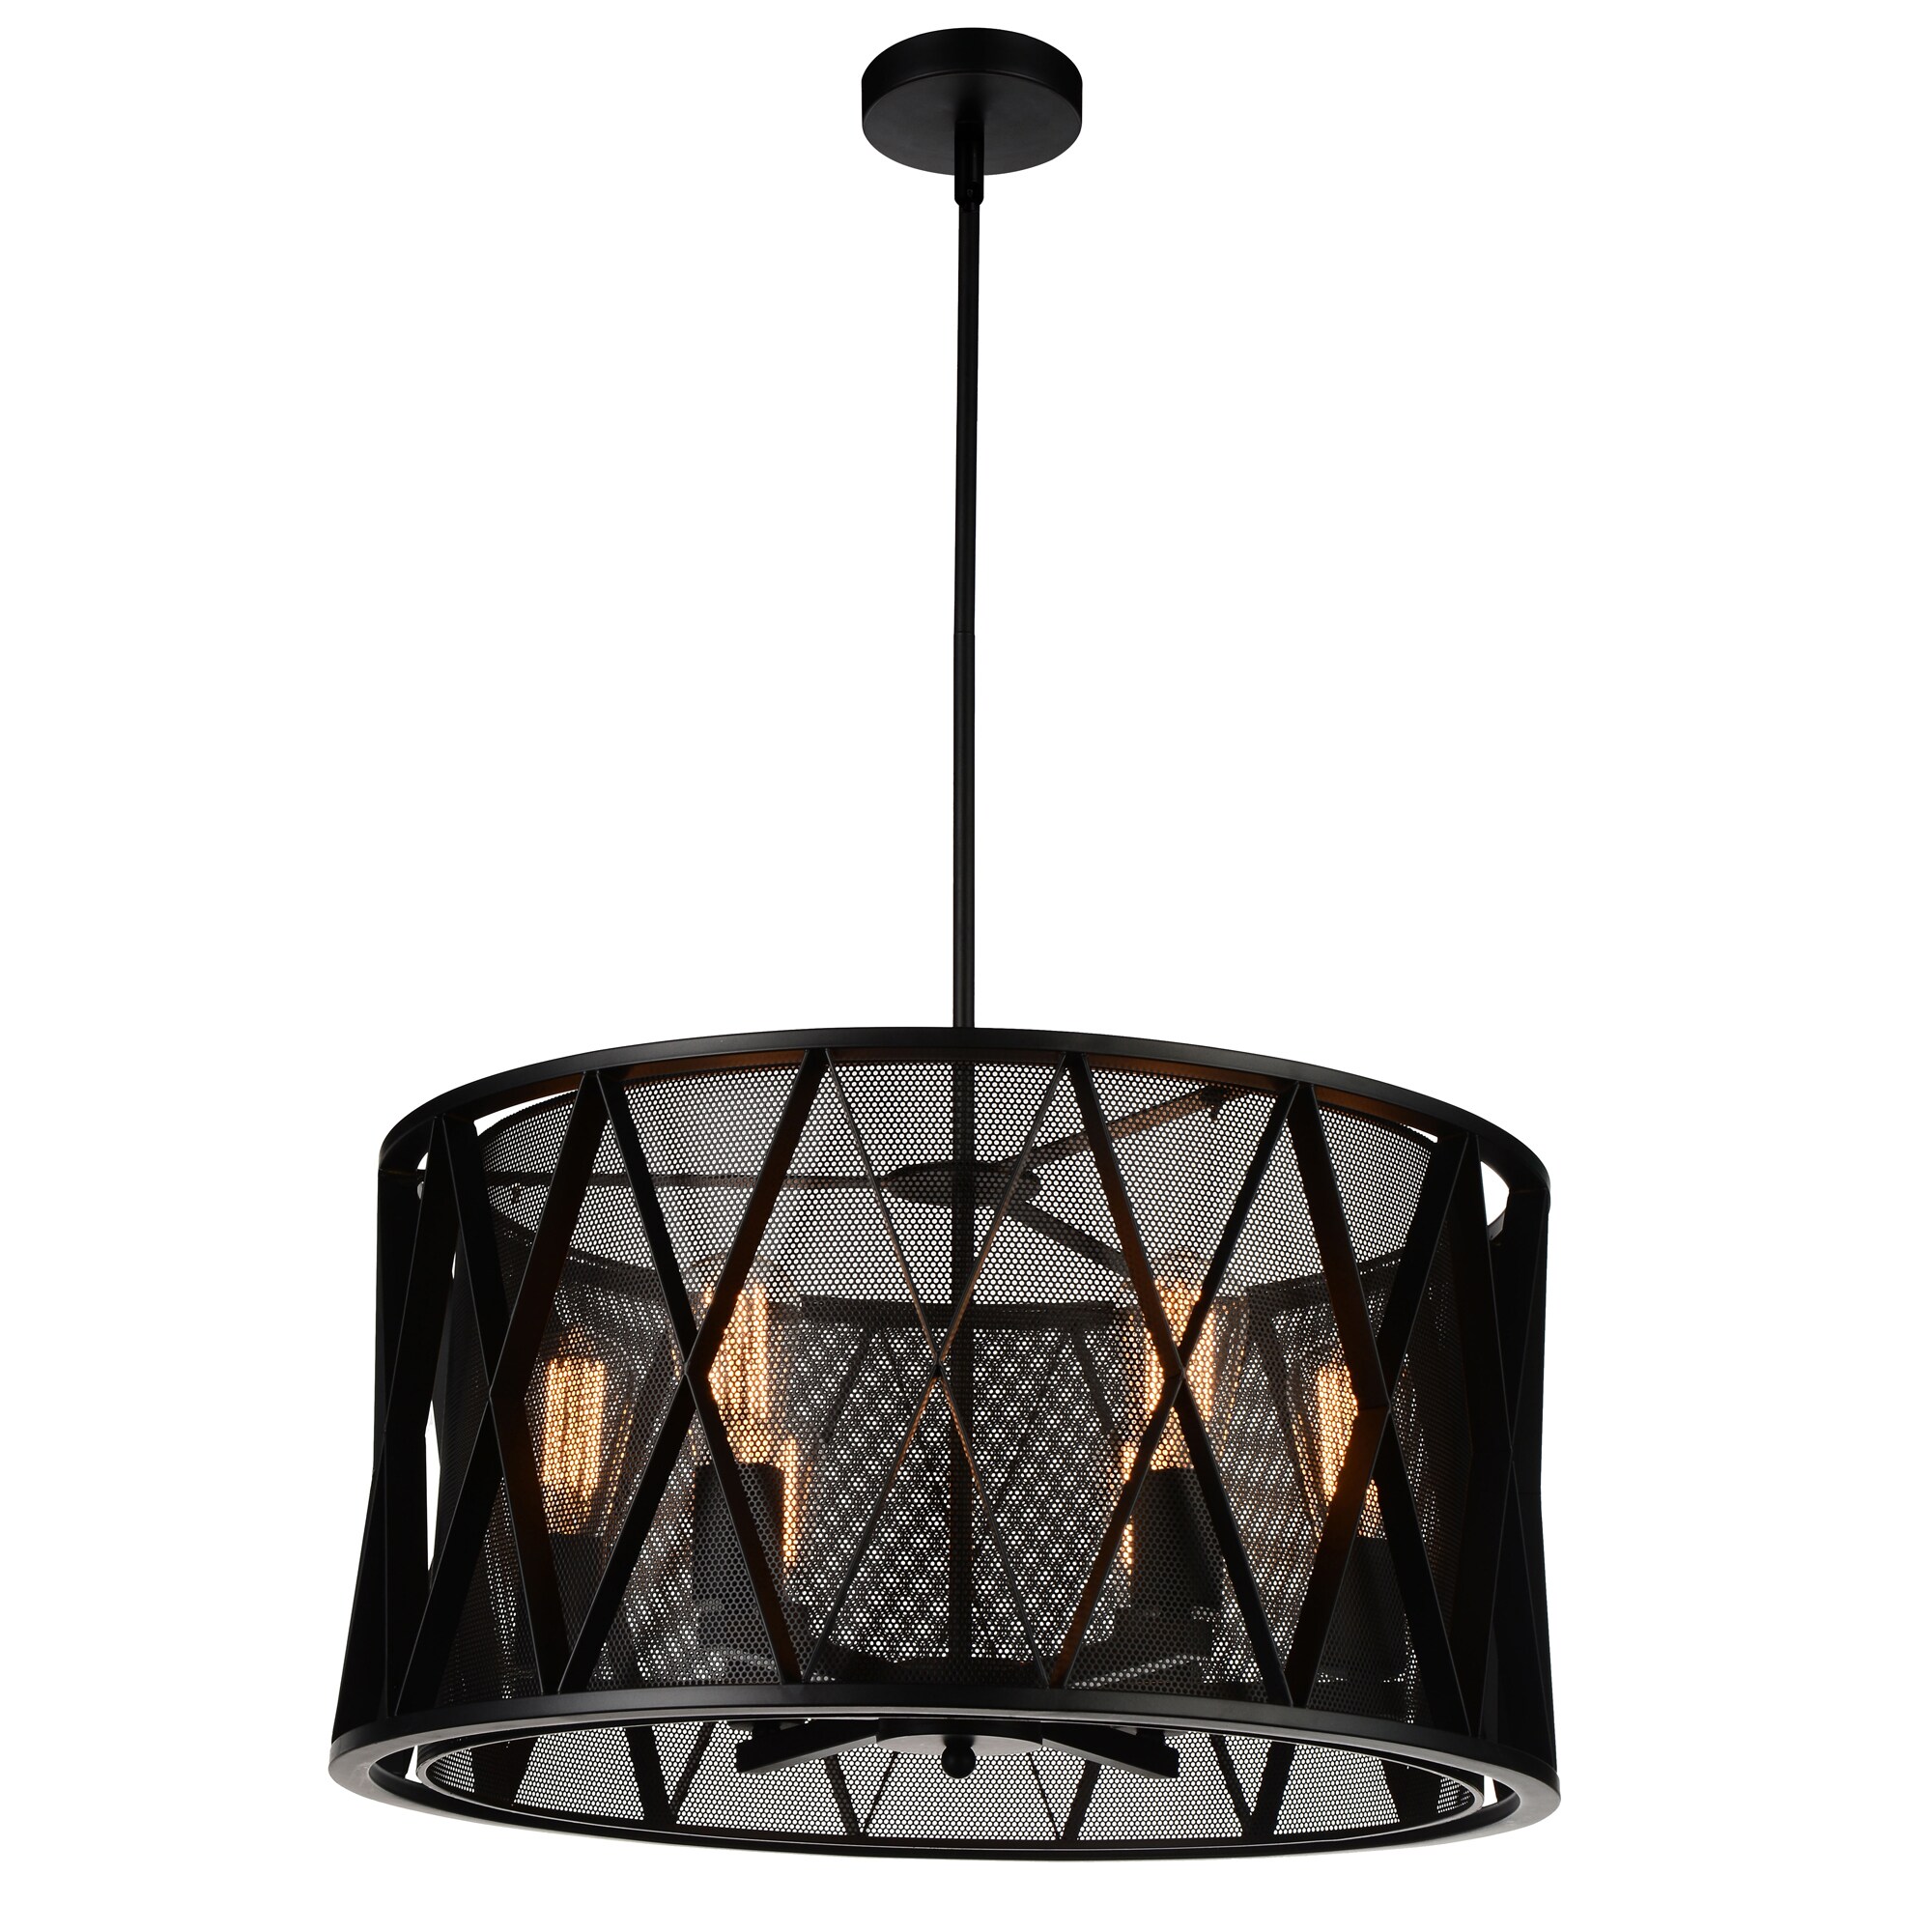 CWI Lighting Tapedia 6-Light Black Rustic Damp Rated Chandelier in the ...